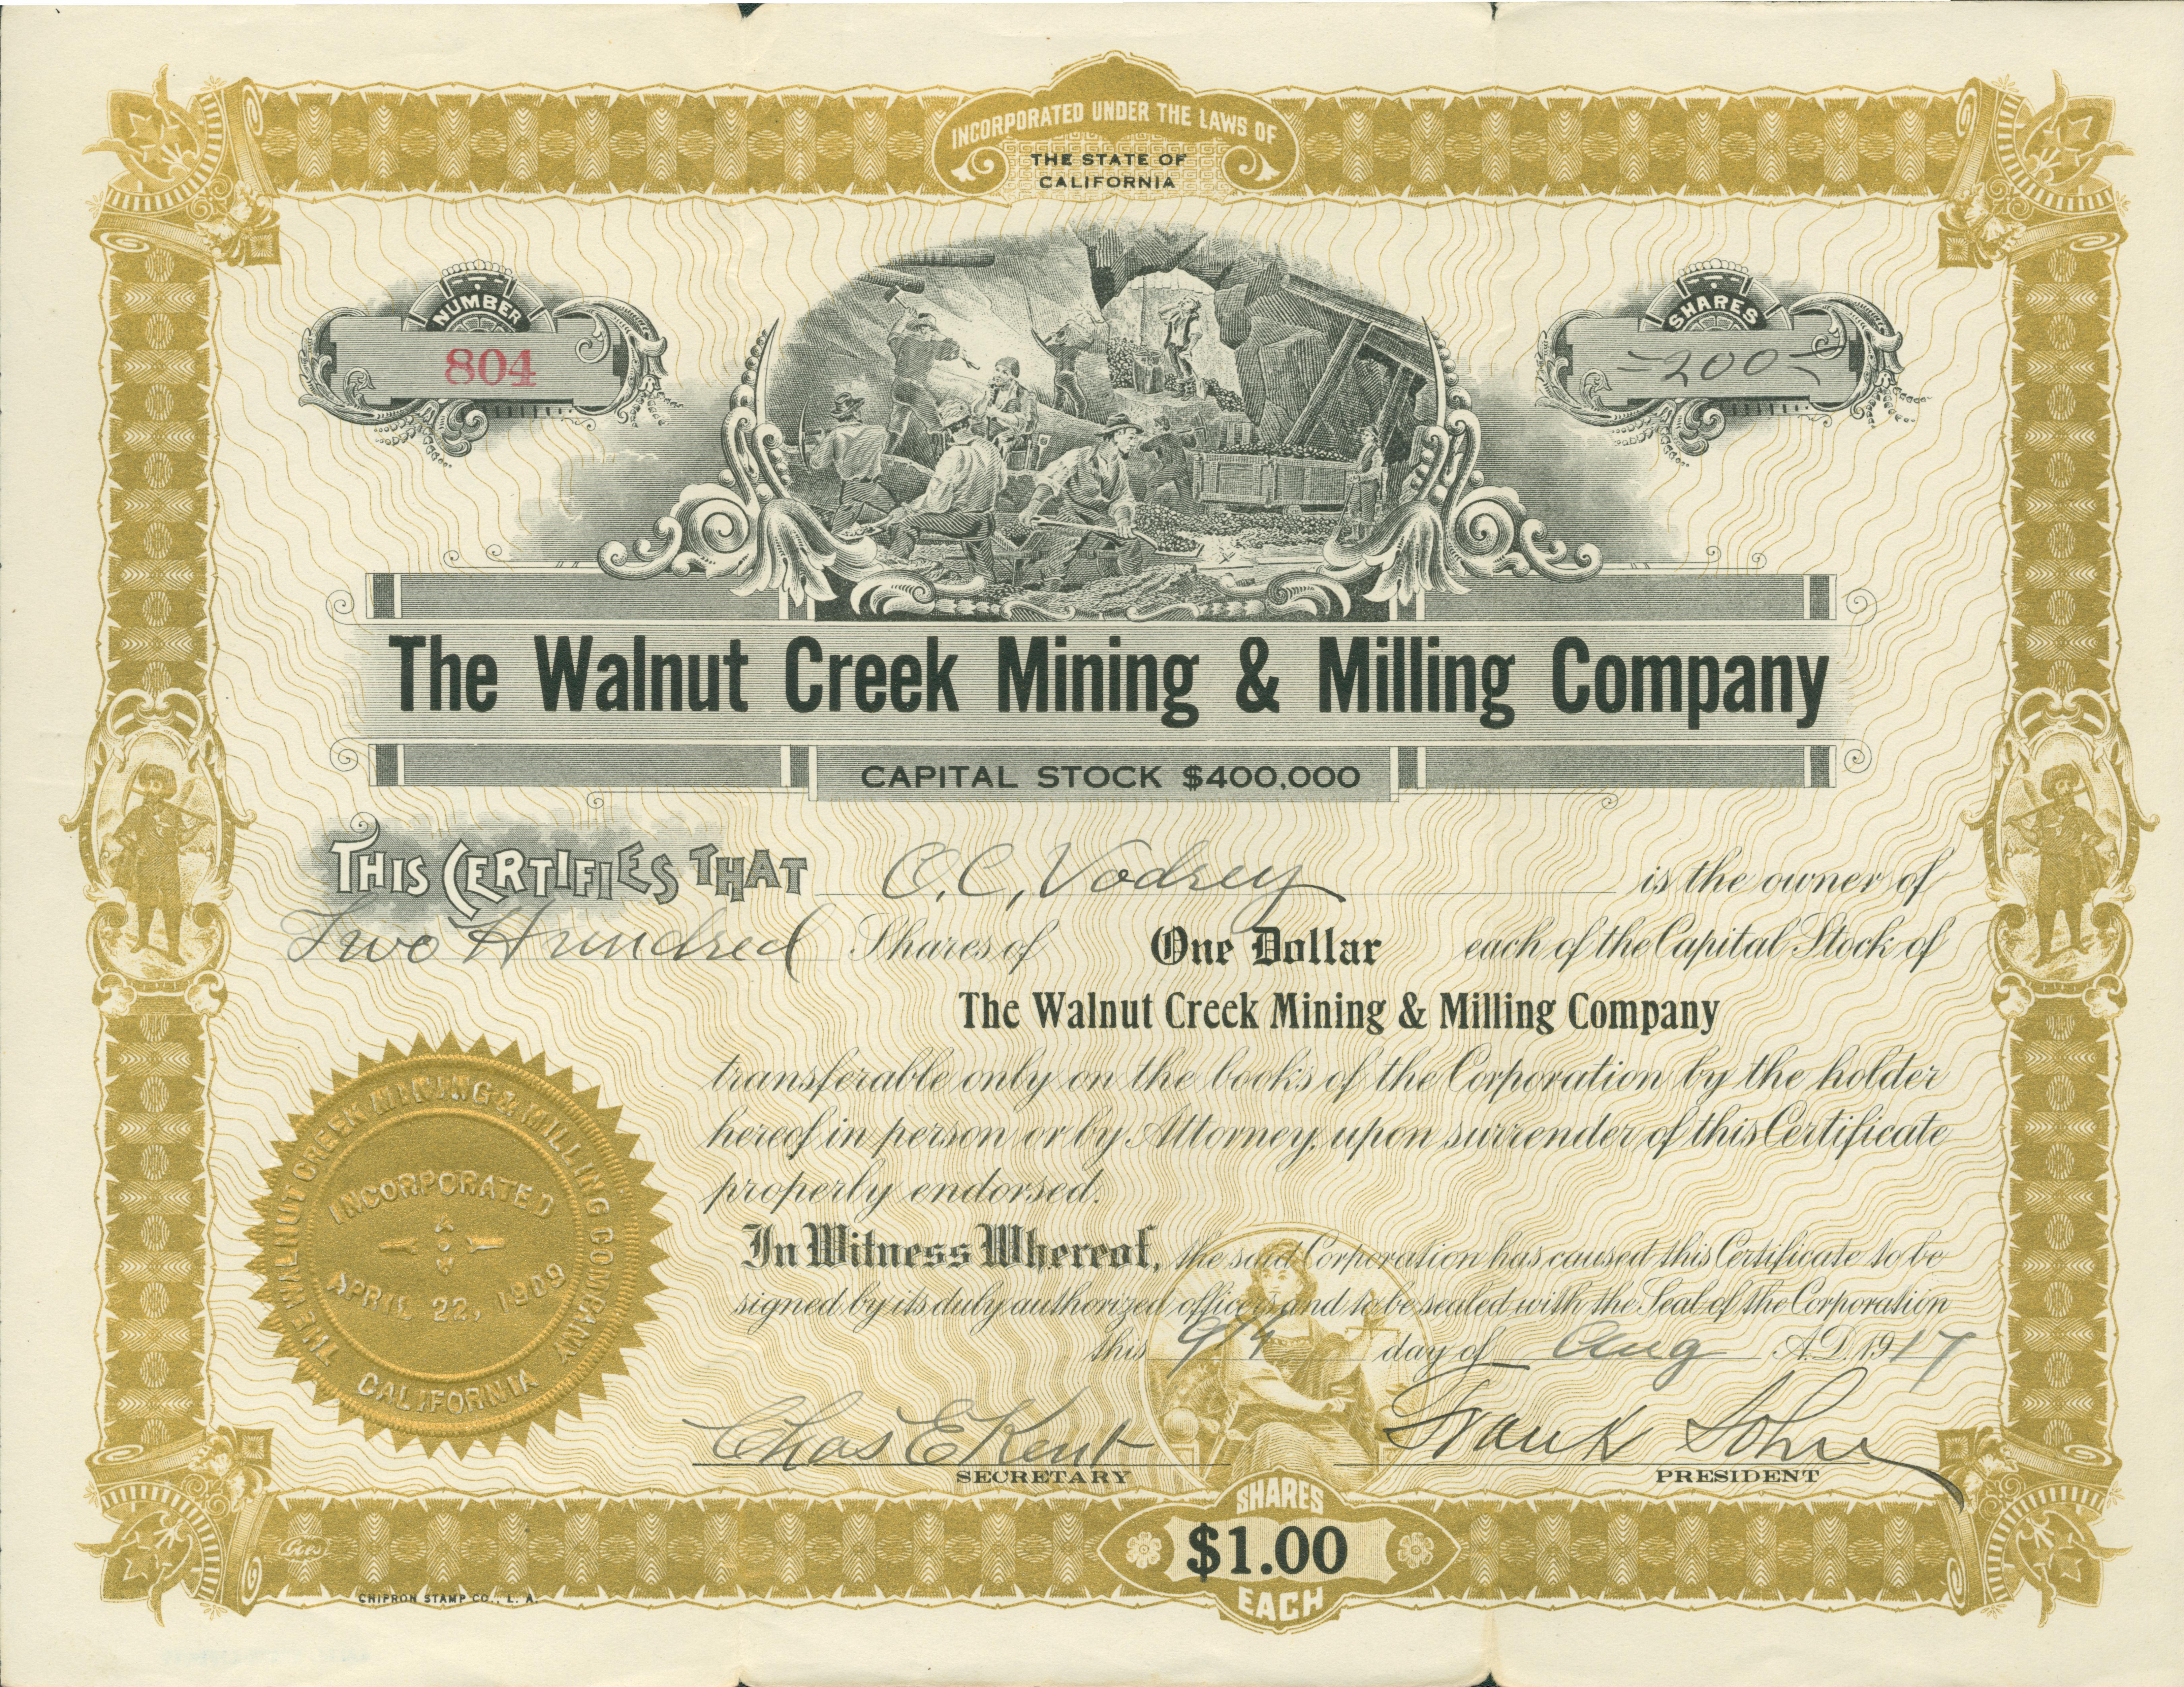 Front of the first certificate contains an engraving of several men working in a hard-rock mine